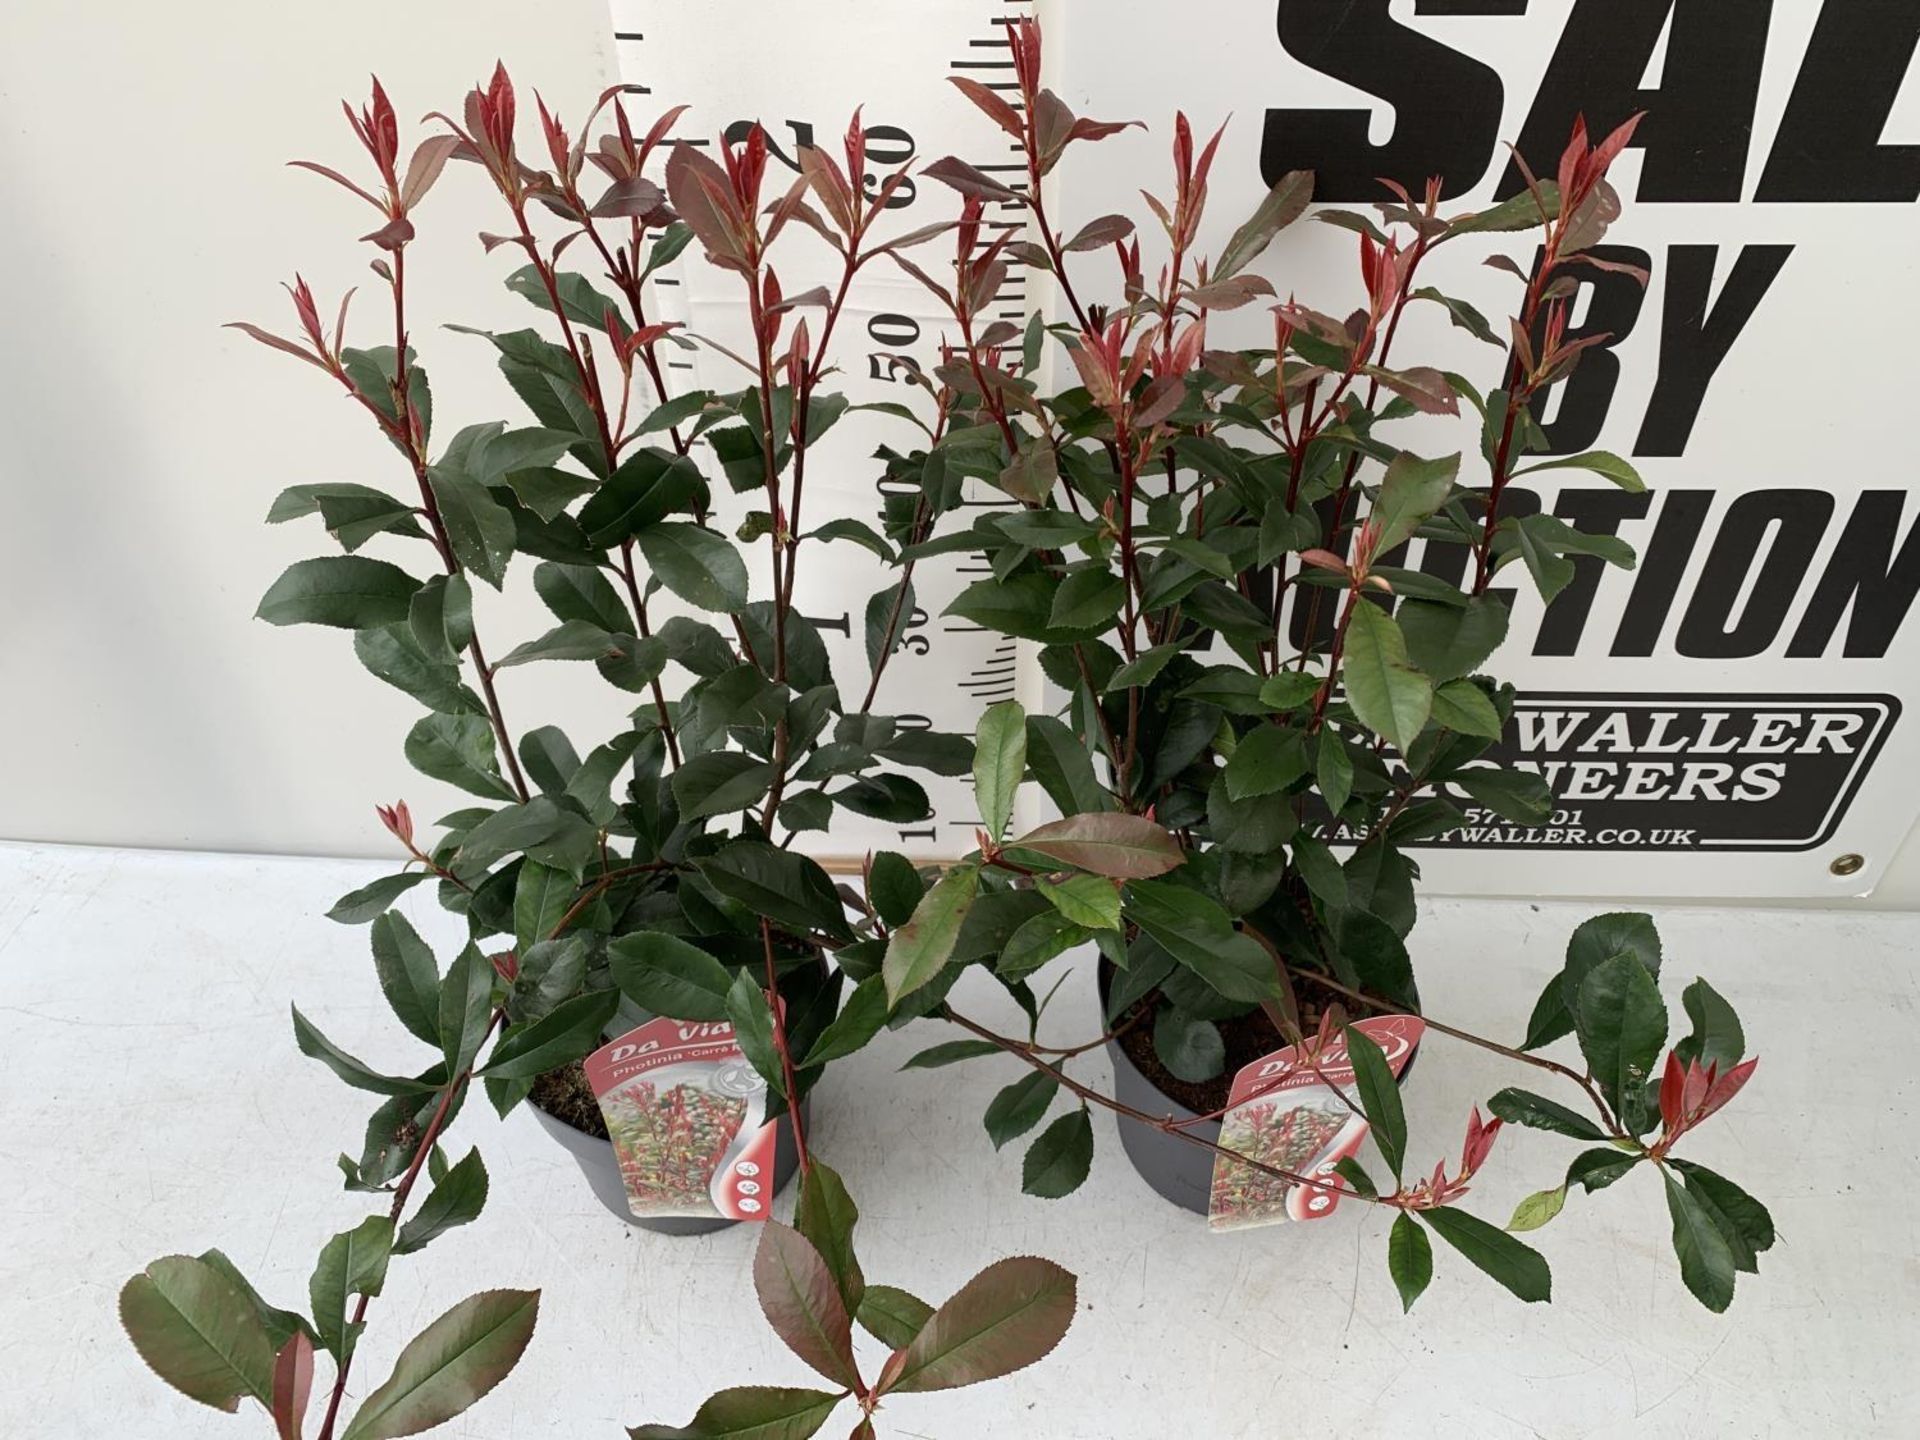 TWO PHOTINIA FRASERI 'CARRE ROUGE' PLANTS IN 3 LTR POTS APPROX 60CM IN HEIGHT PLUS VAT TO BE SOLD - Image 2 of 5